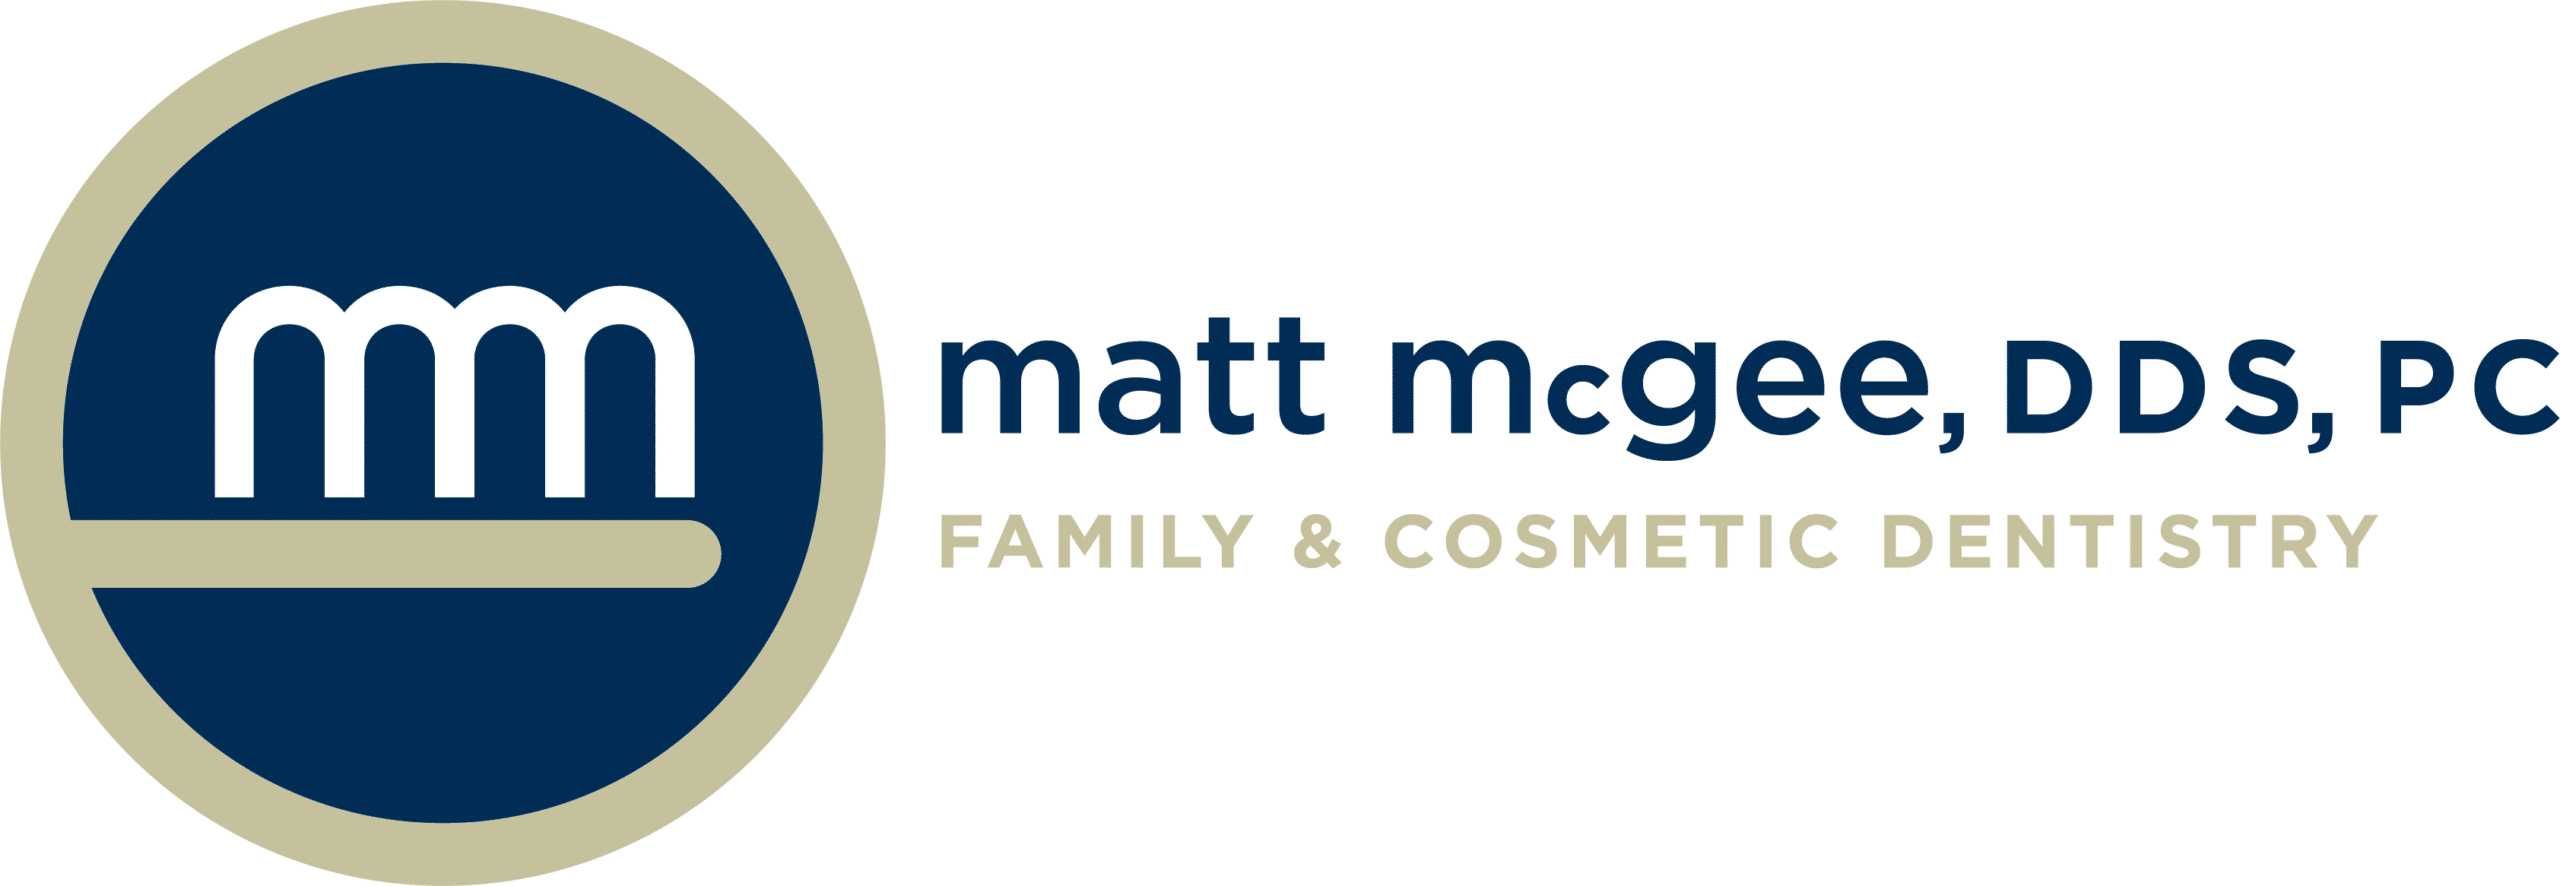 logo matt mcgee family & cosmetic dentistry, Invisalign, cerec same-day dental crowns, dental technology, family dentistry, general dentistry, cosmetic dentistry, dental cleanings, dental exams, gum disease treatment, root canal therapy treatment, tooth extractions, periodontal disease maintenance, tooth-colored fillings, dental fillings, dental sealants, fluoride treatment, dental veneers, dental crowns, dental implants, dentures, restorative dentistry, clear aligners, traditional braces, children's dentistry, Dentist in Nashville Tennessee, MAIN LINE: (615) 298-2385, NEW PATIENT LINE: (615) 675-6029, 2827 BRANSFORD AVENUE, NASHVILLE, TN 37204,